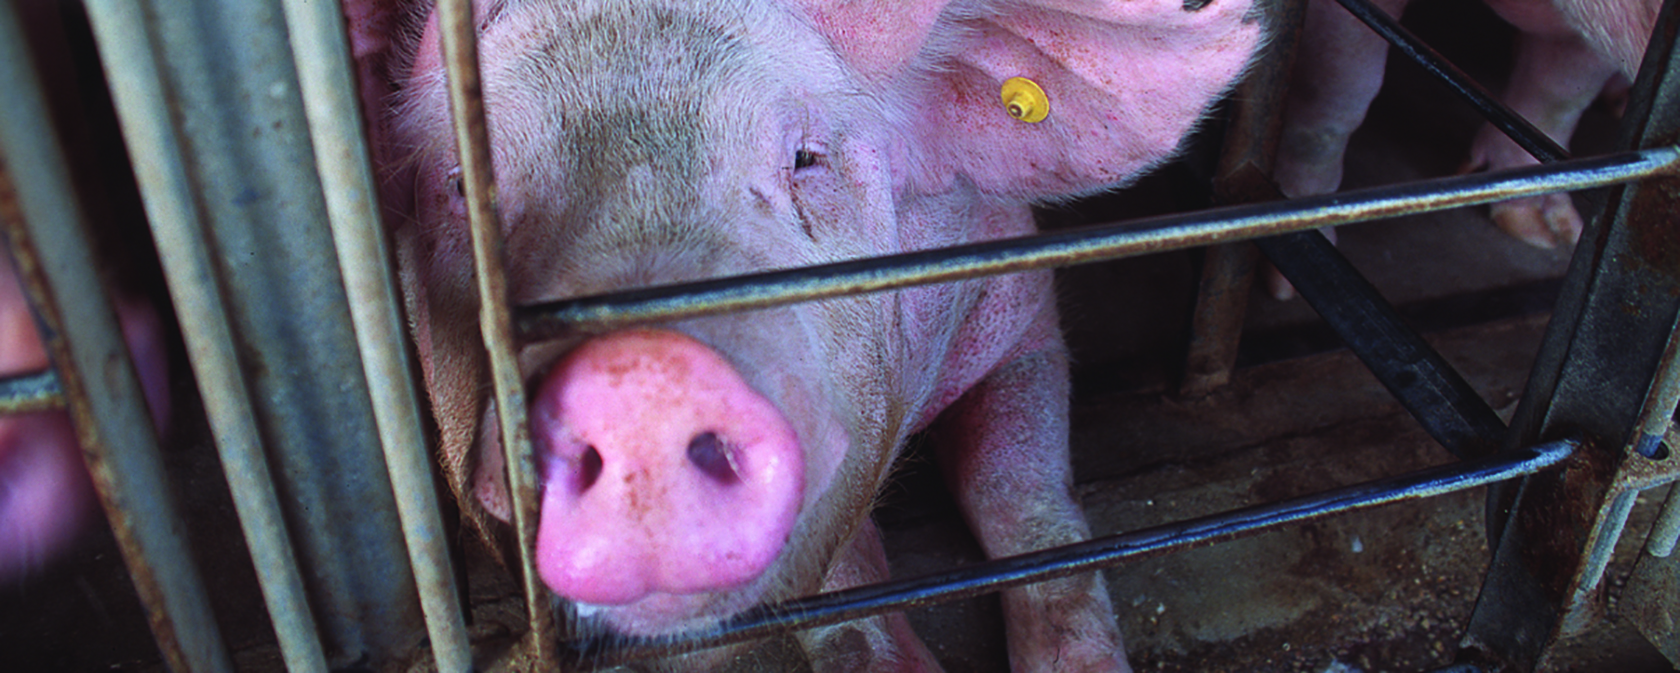 Breaking: Proposed Farm Bill would create a nightmare for animals